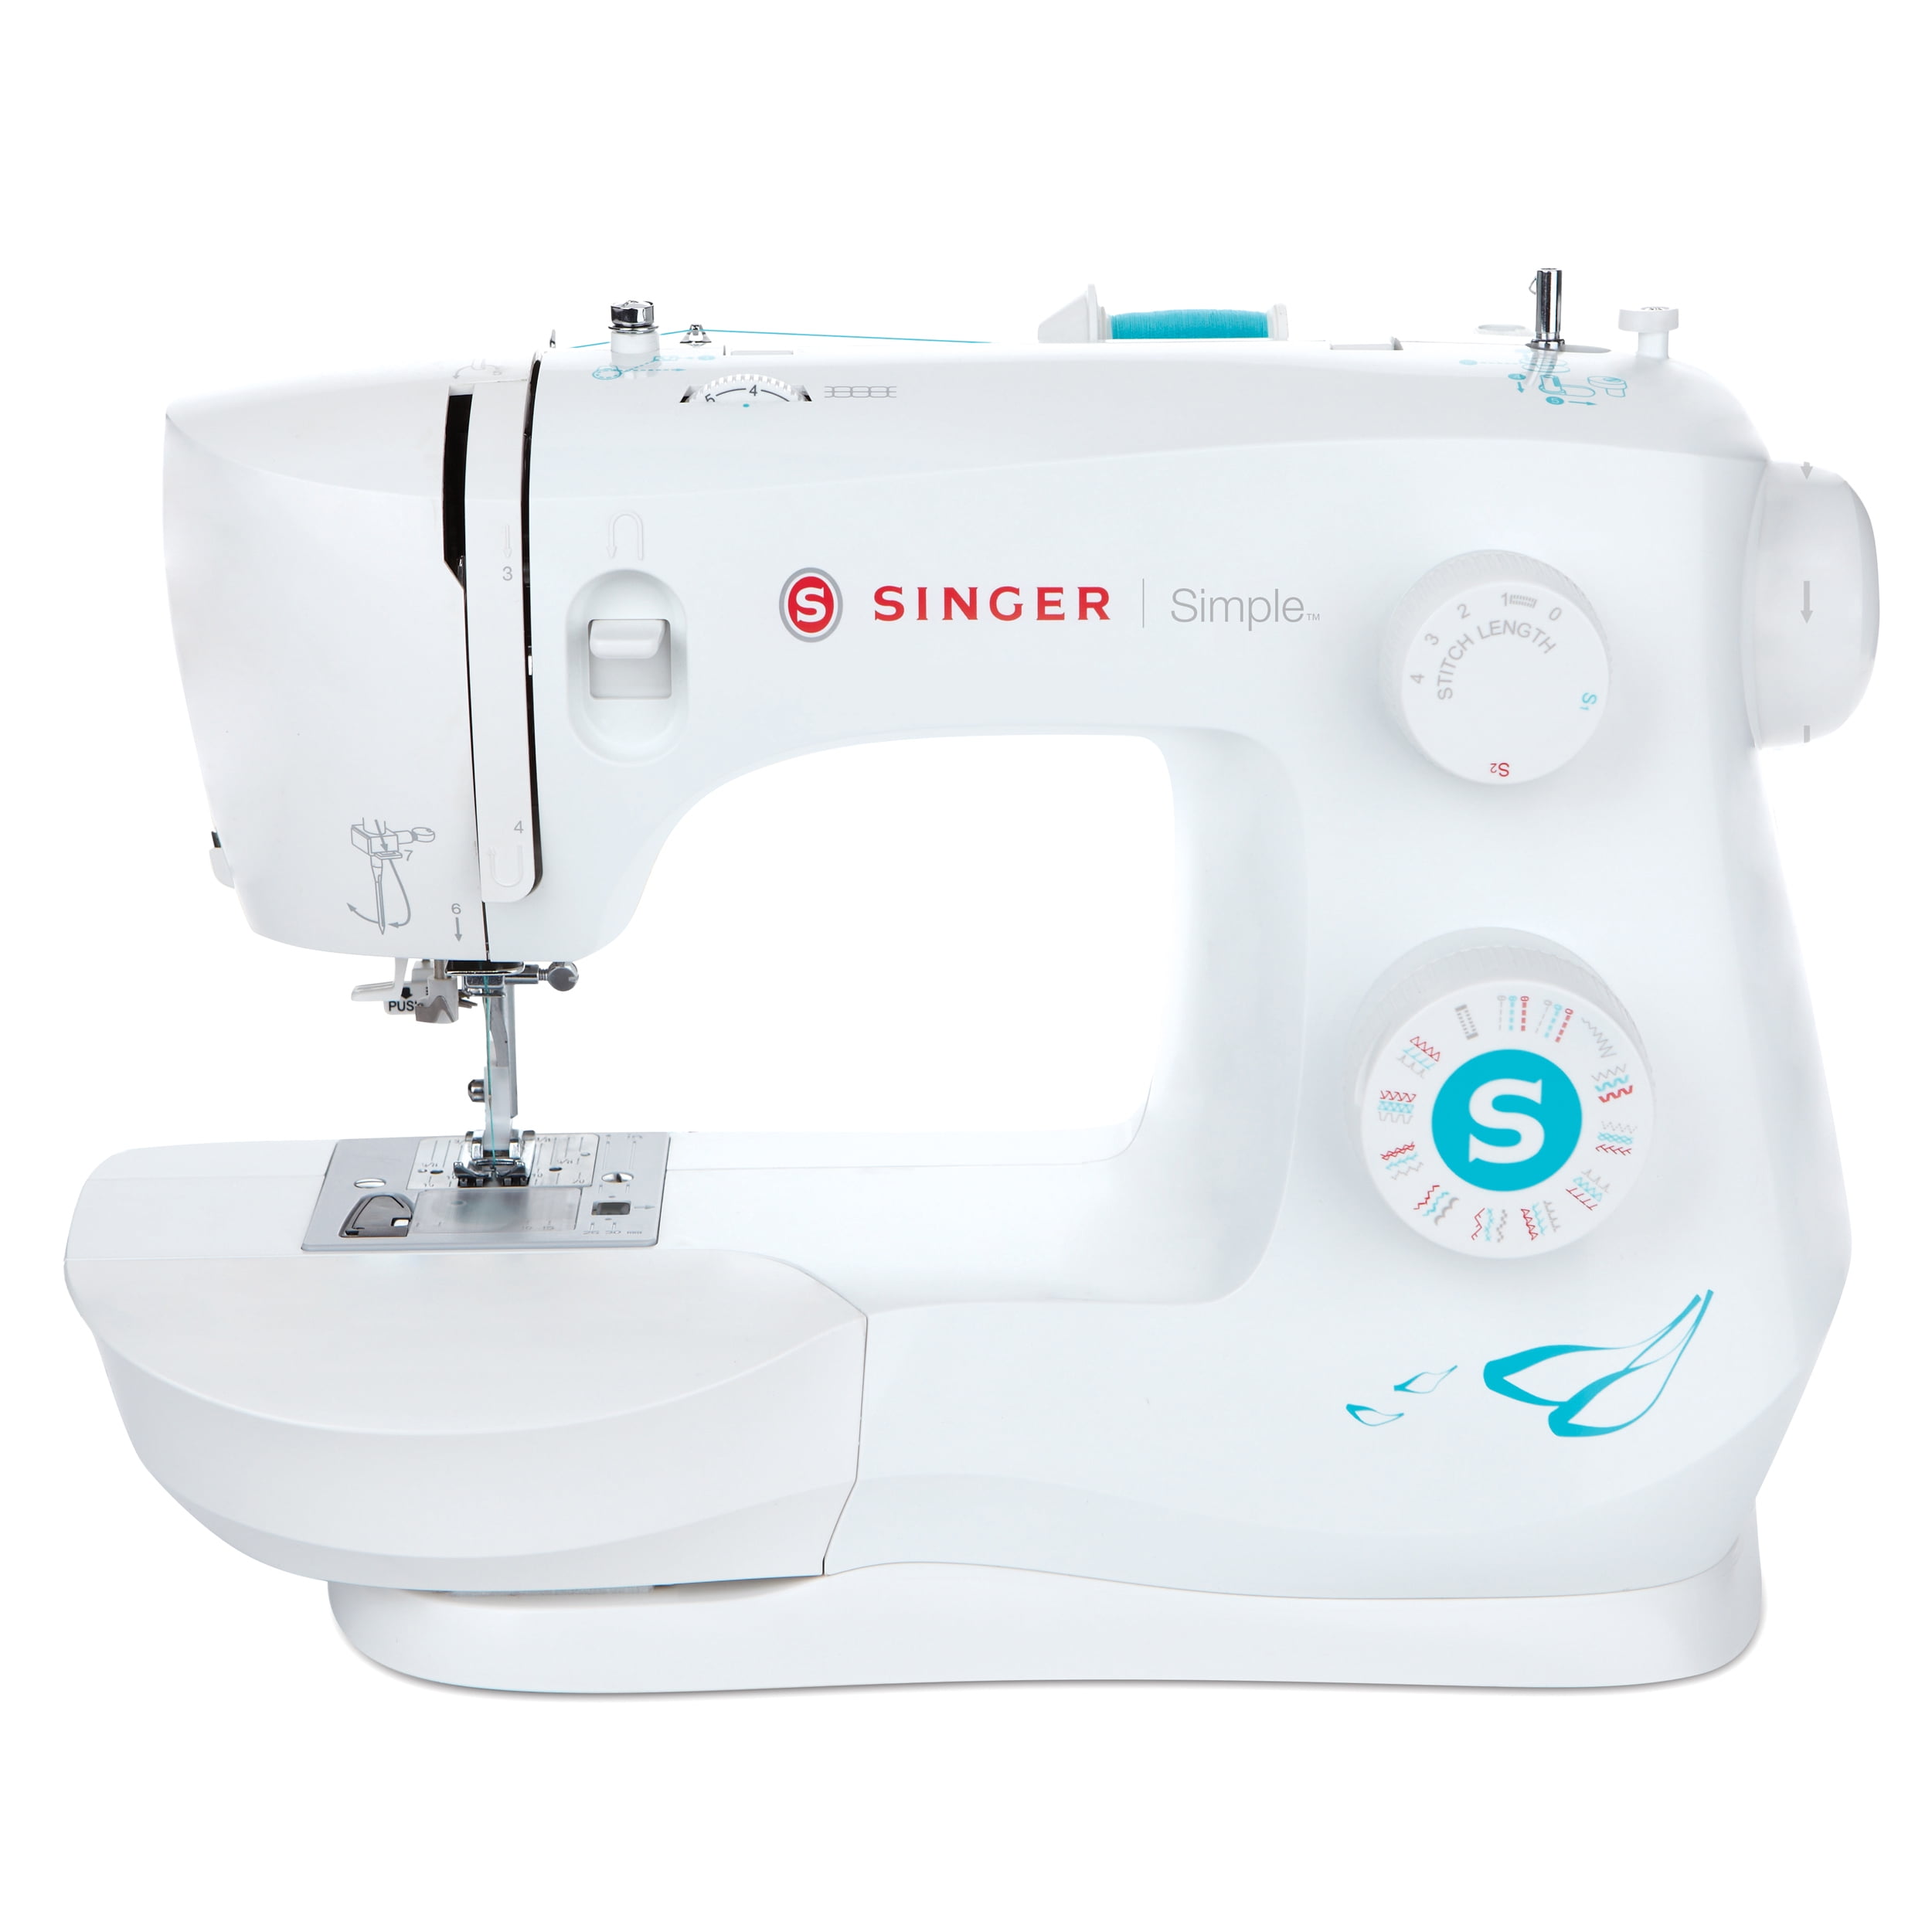 SINGER SIMPLE SEWING MACHINE - Earl's Auction Company